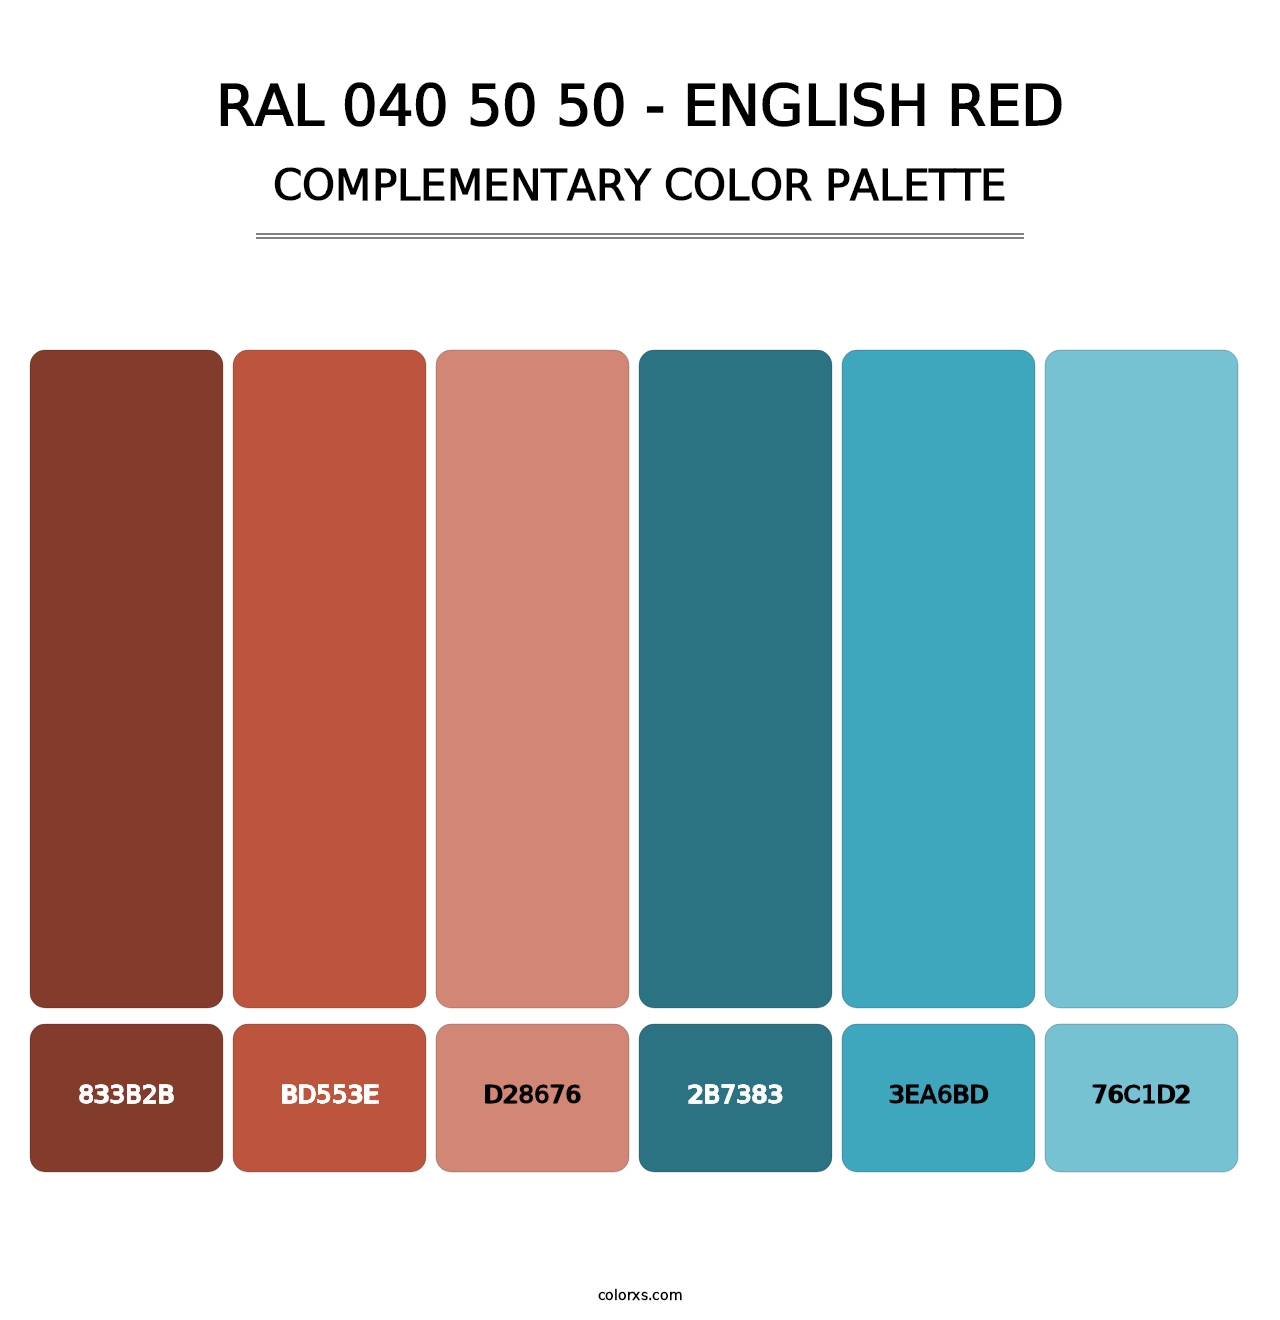 RAL 040 50 50 - English Red - Complementary Color Palette